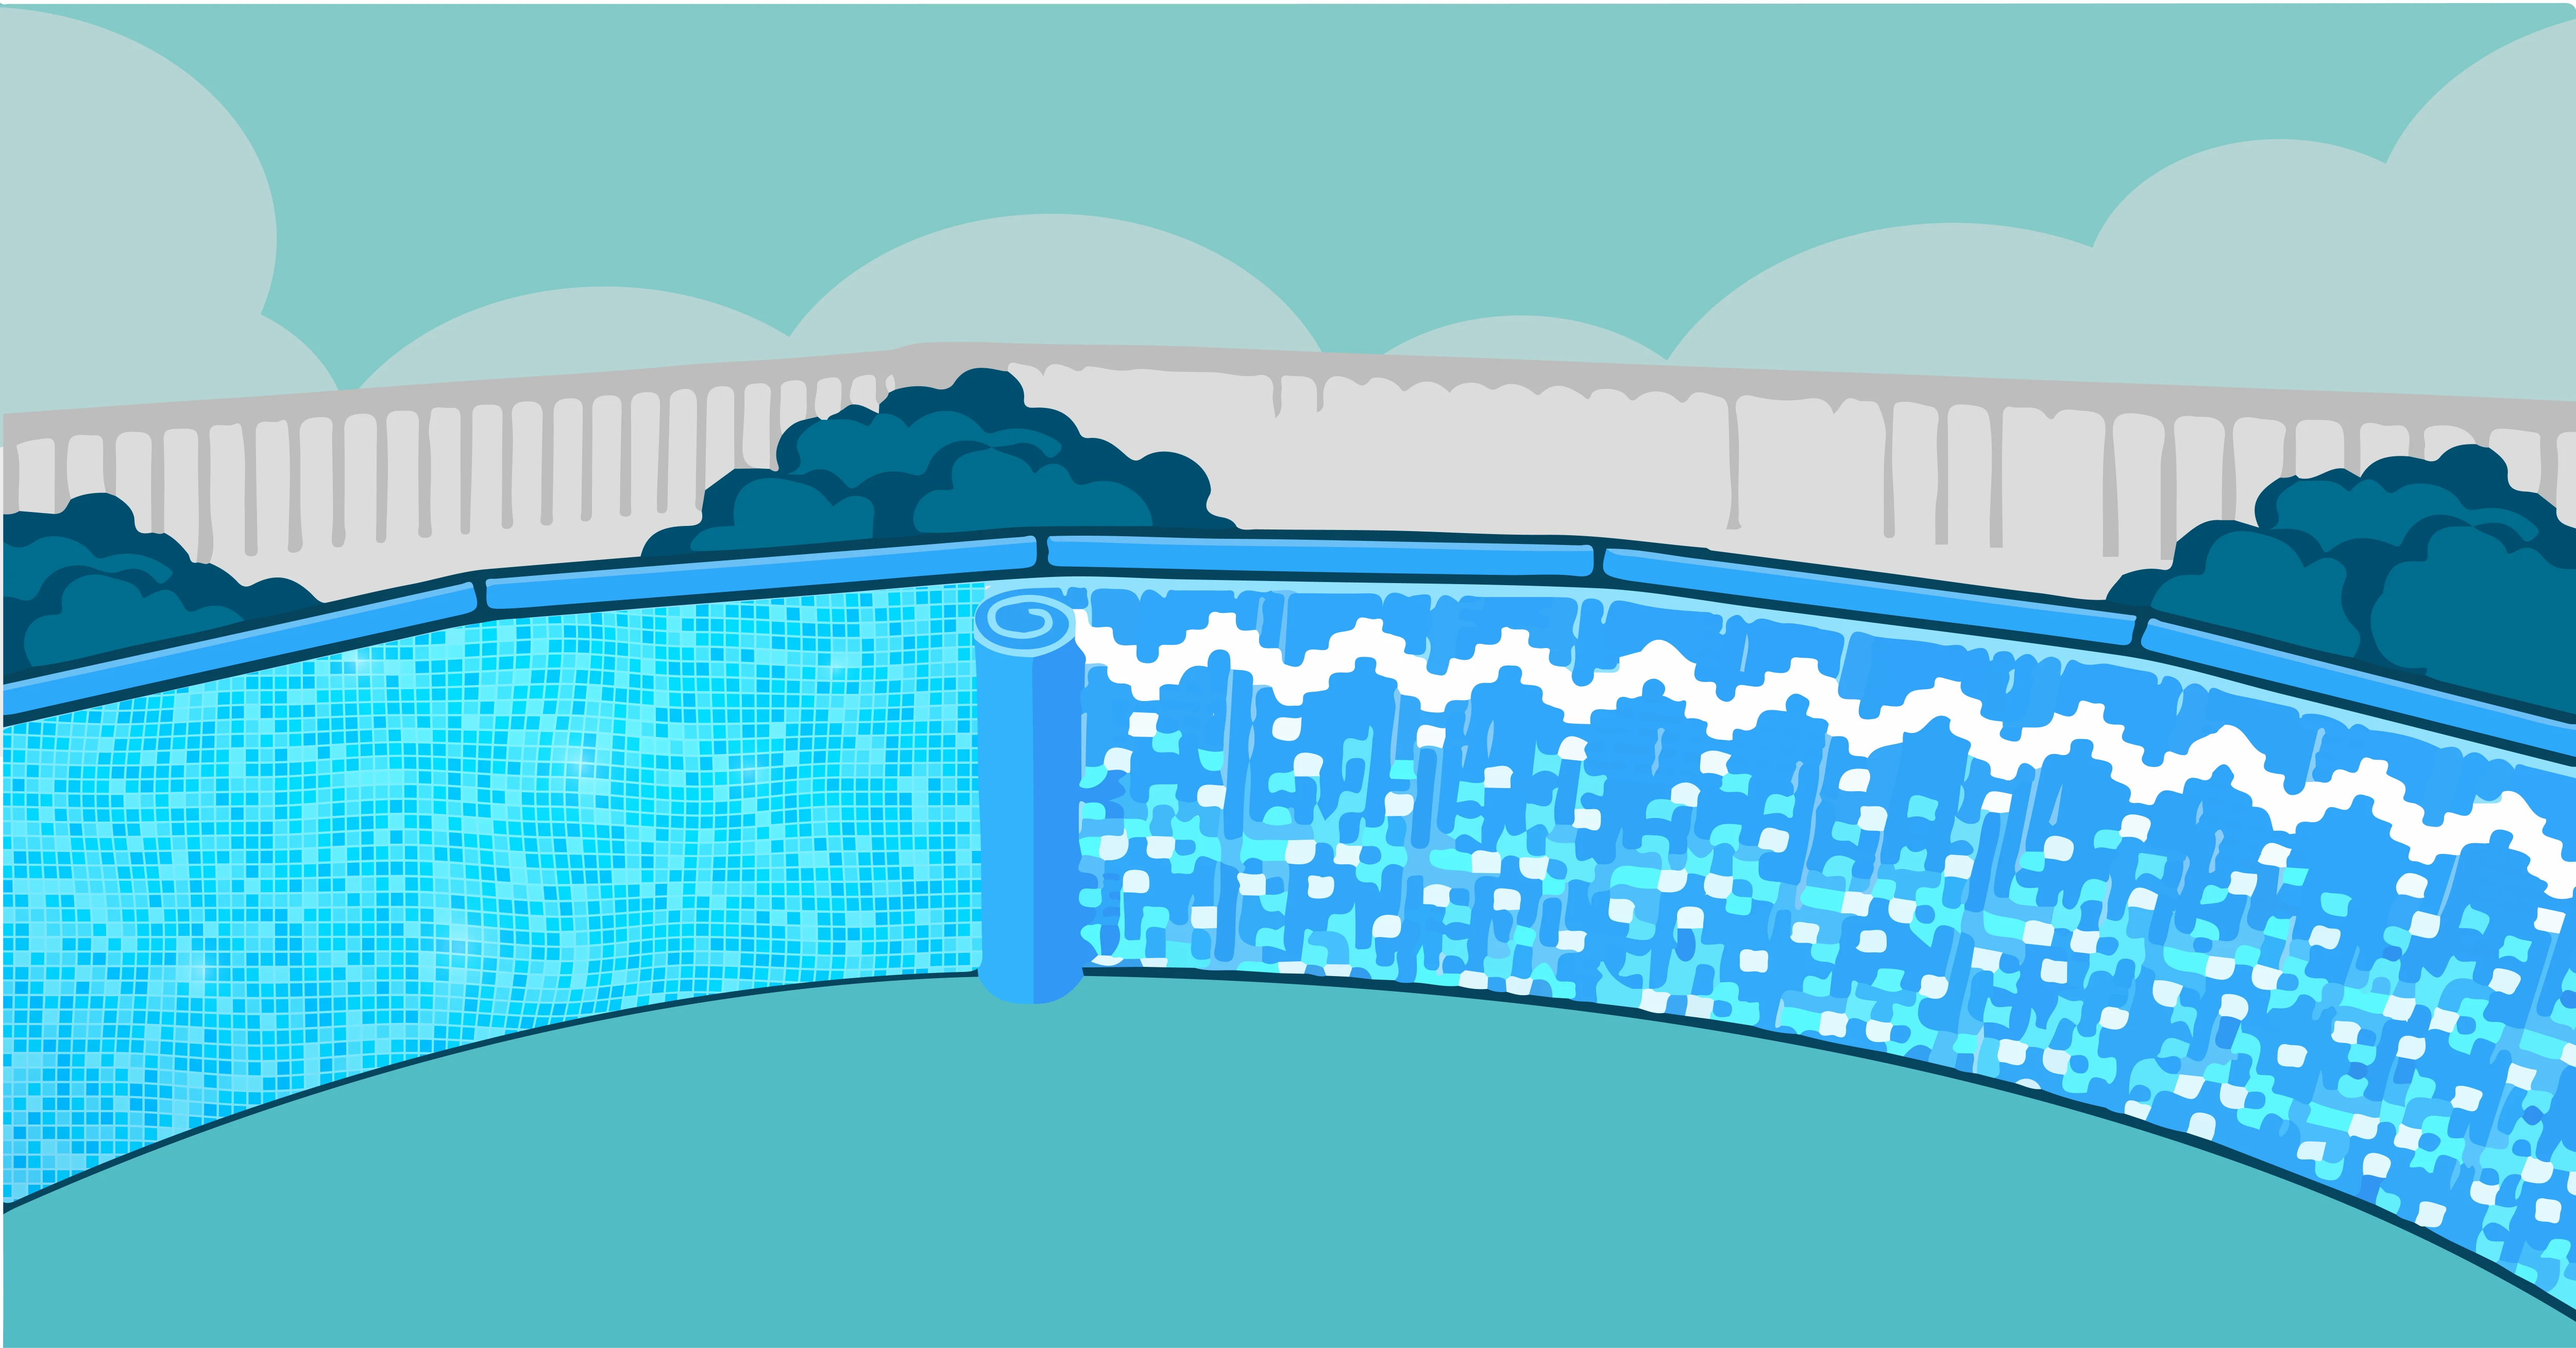 above ground pool liners